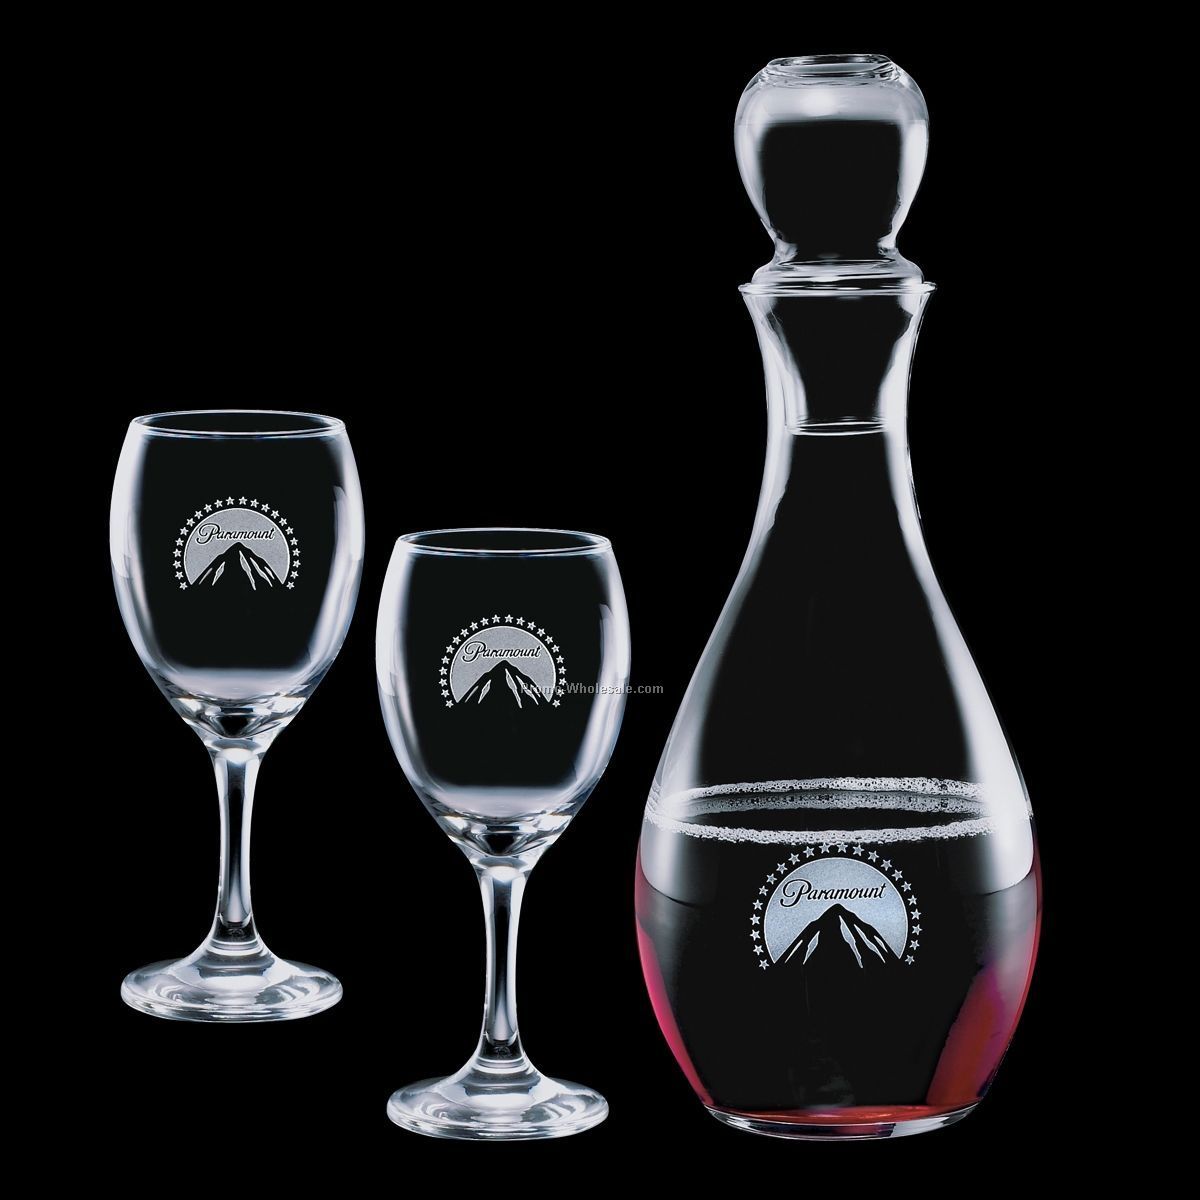 33 Oz. Carberry Decanter & 2 Wine Glasses